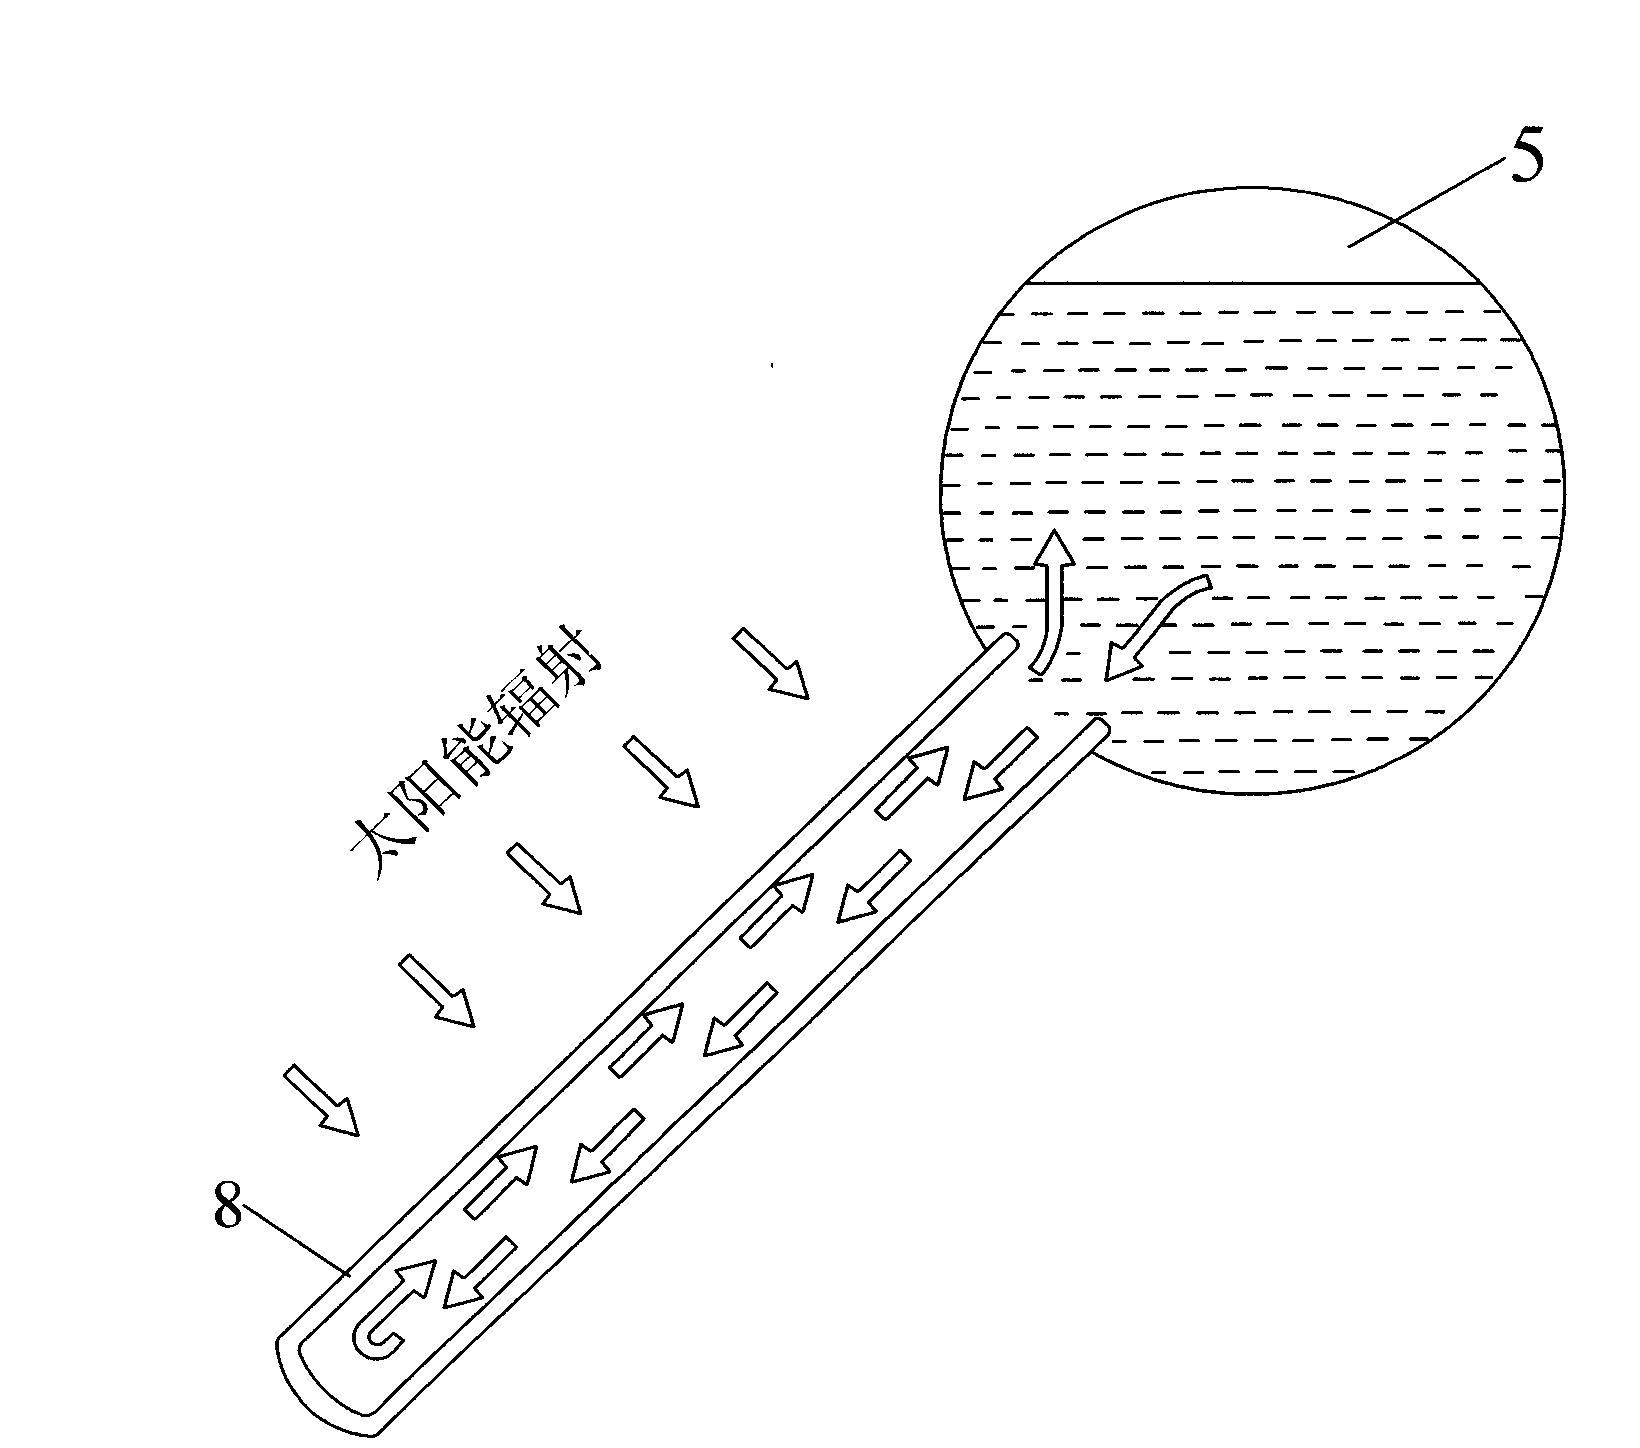 Solar-assisted biogas fermentation device and method